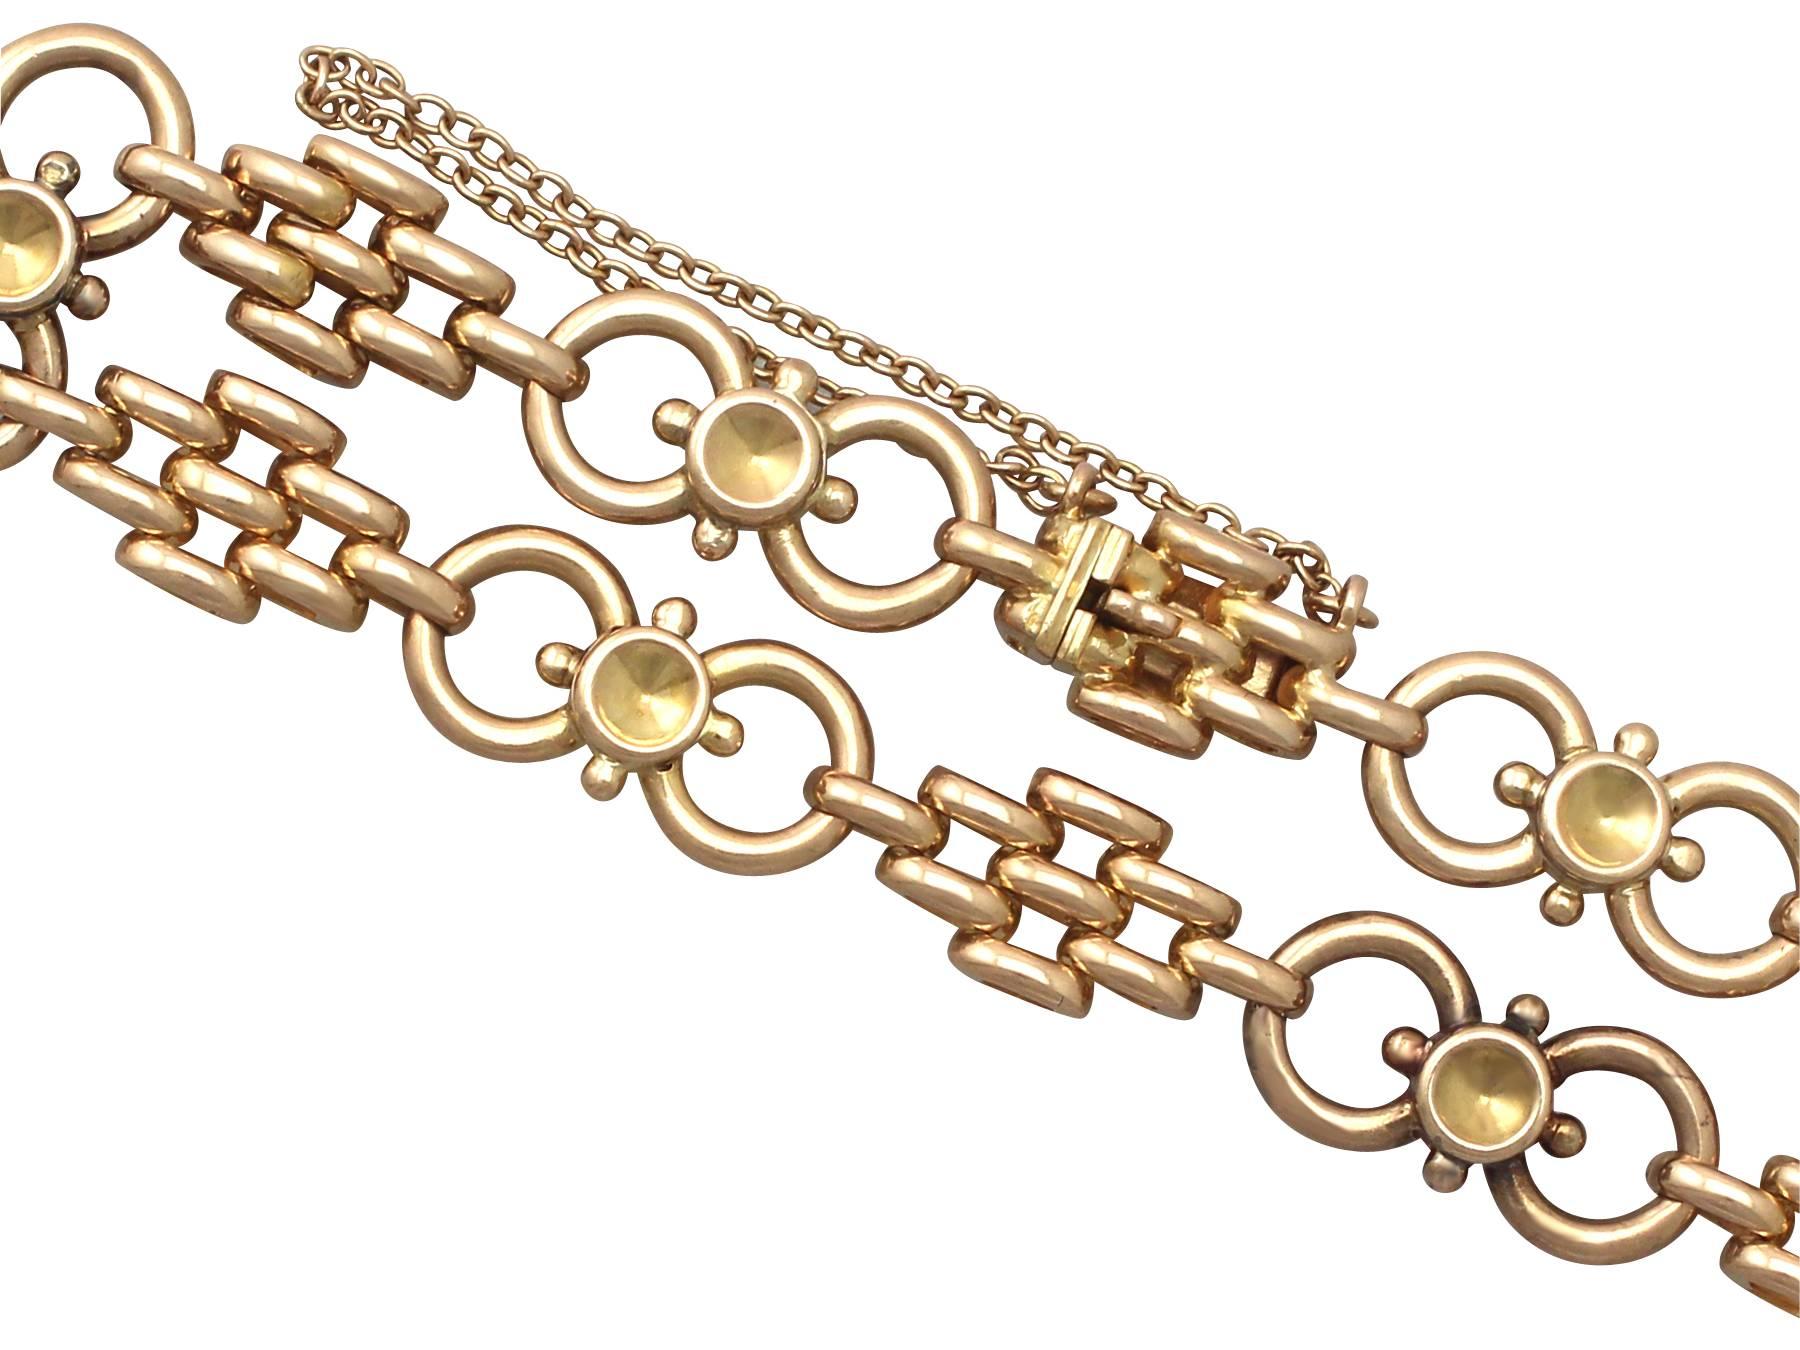 A fine and impressive 15 karat yellow gold bracelet; part of our diverse antique jewelry and estate jewelry collections

This fine and impressive antique bracelet has been crafted in 15k yellow gold.

The impressive gate style bracelet displays